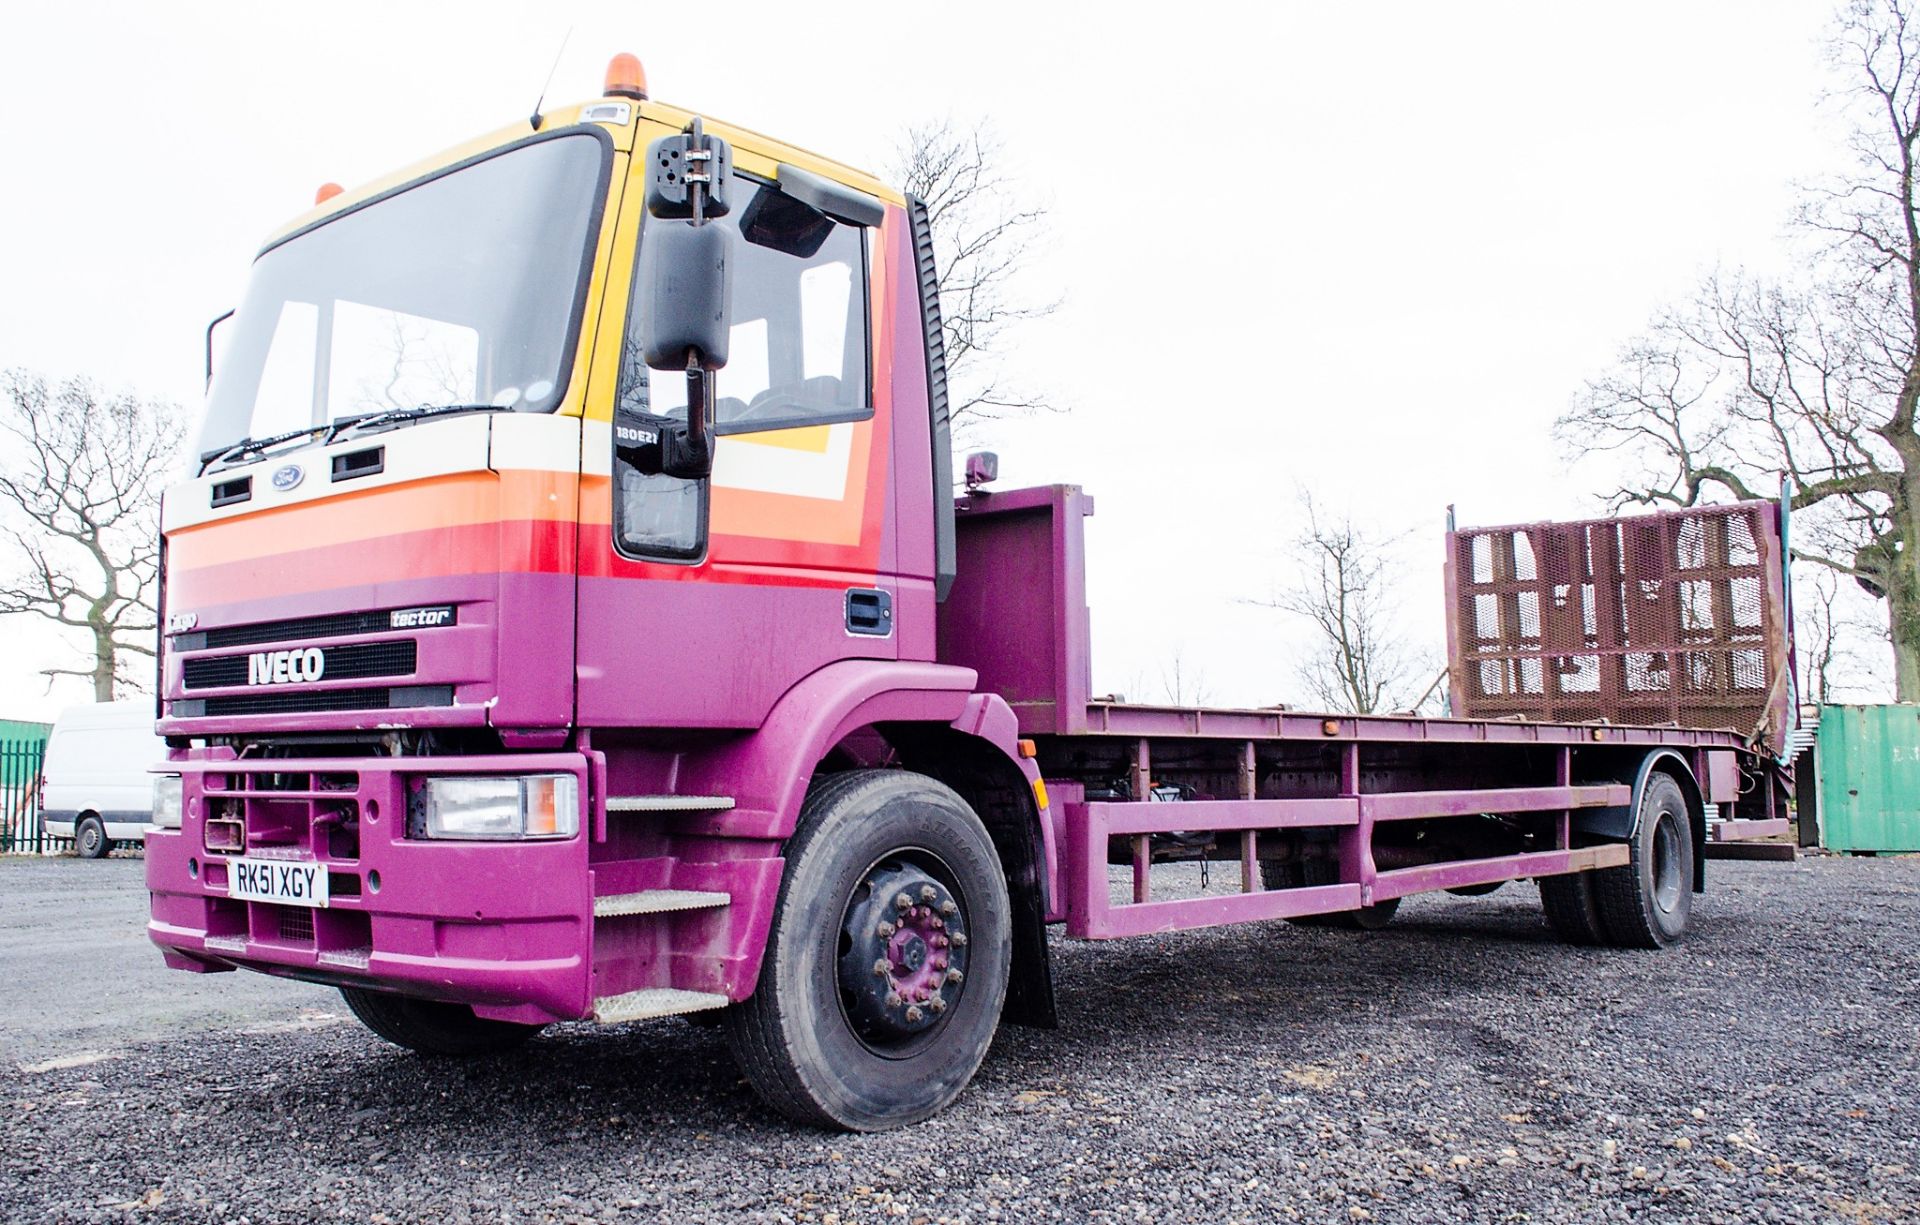 Iveco 180E21 Cargo 18 tonne beaver tail plant lorry Registration Number: RK51 XGY Date of